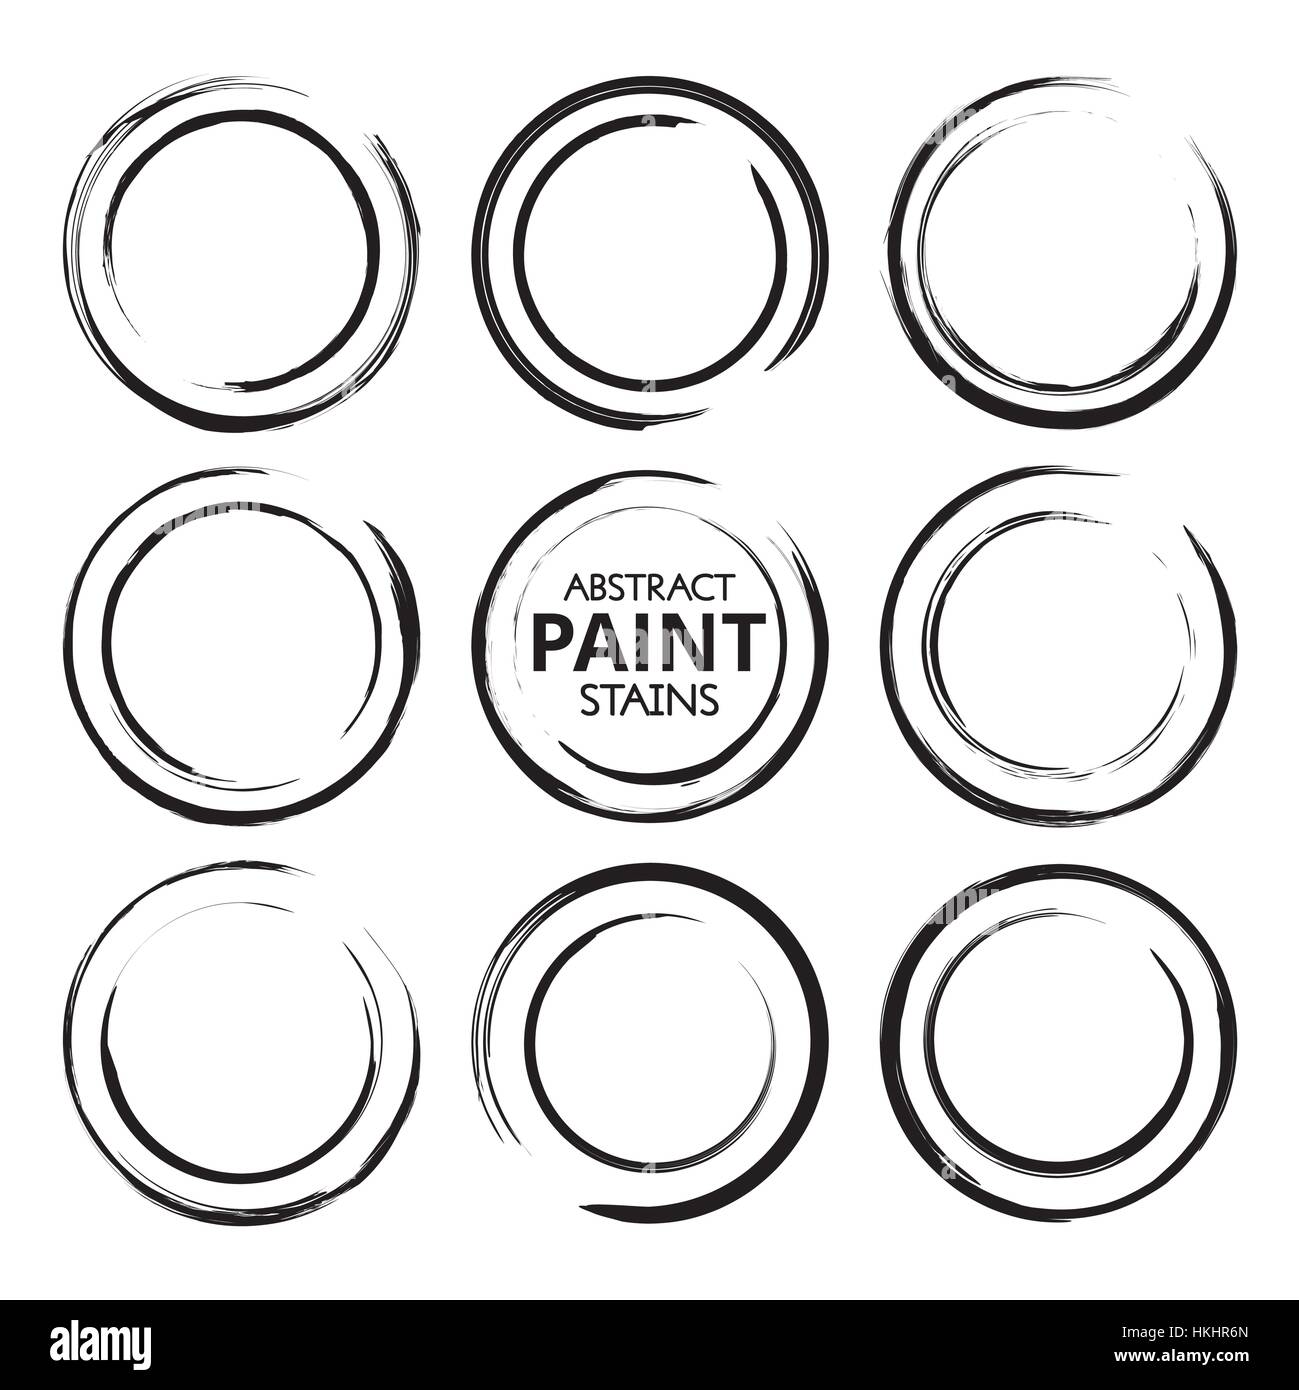 Abstract Paint Stains Stock Vector